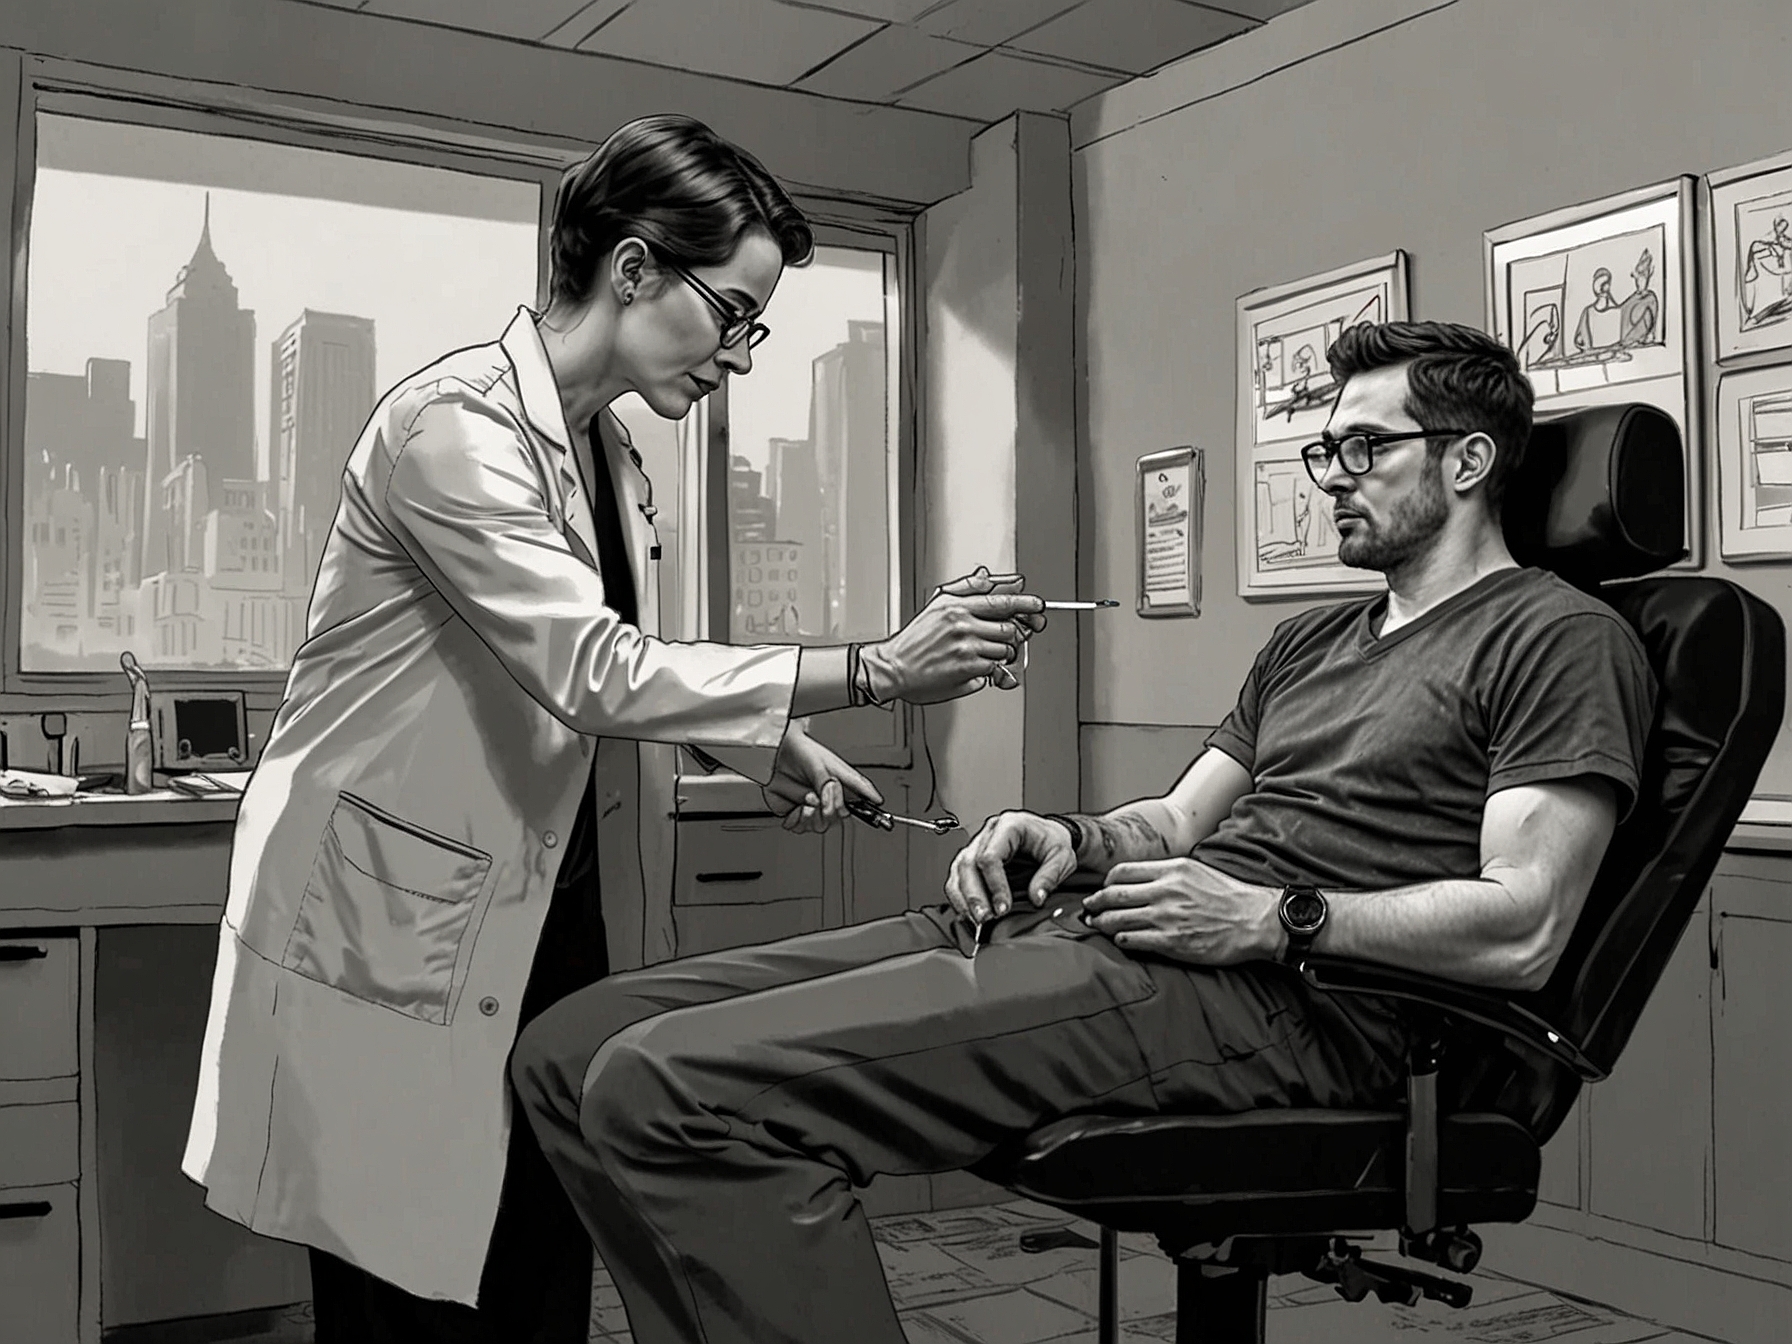 Illustration of a healthcare provider administering a subcutaneous buprenorphine injection to a patient, underscoring the effectiveness and safety in treating opioid dependence among fentanyl users.